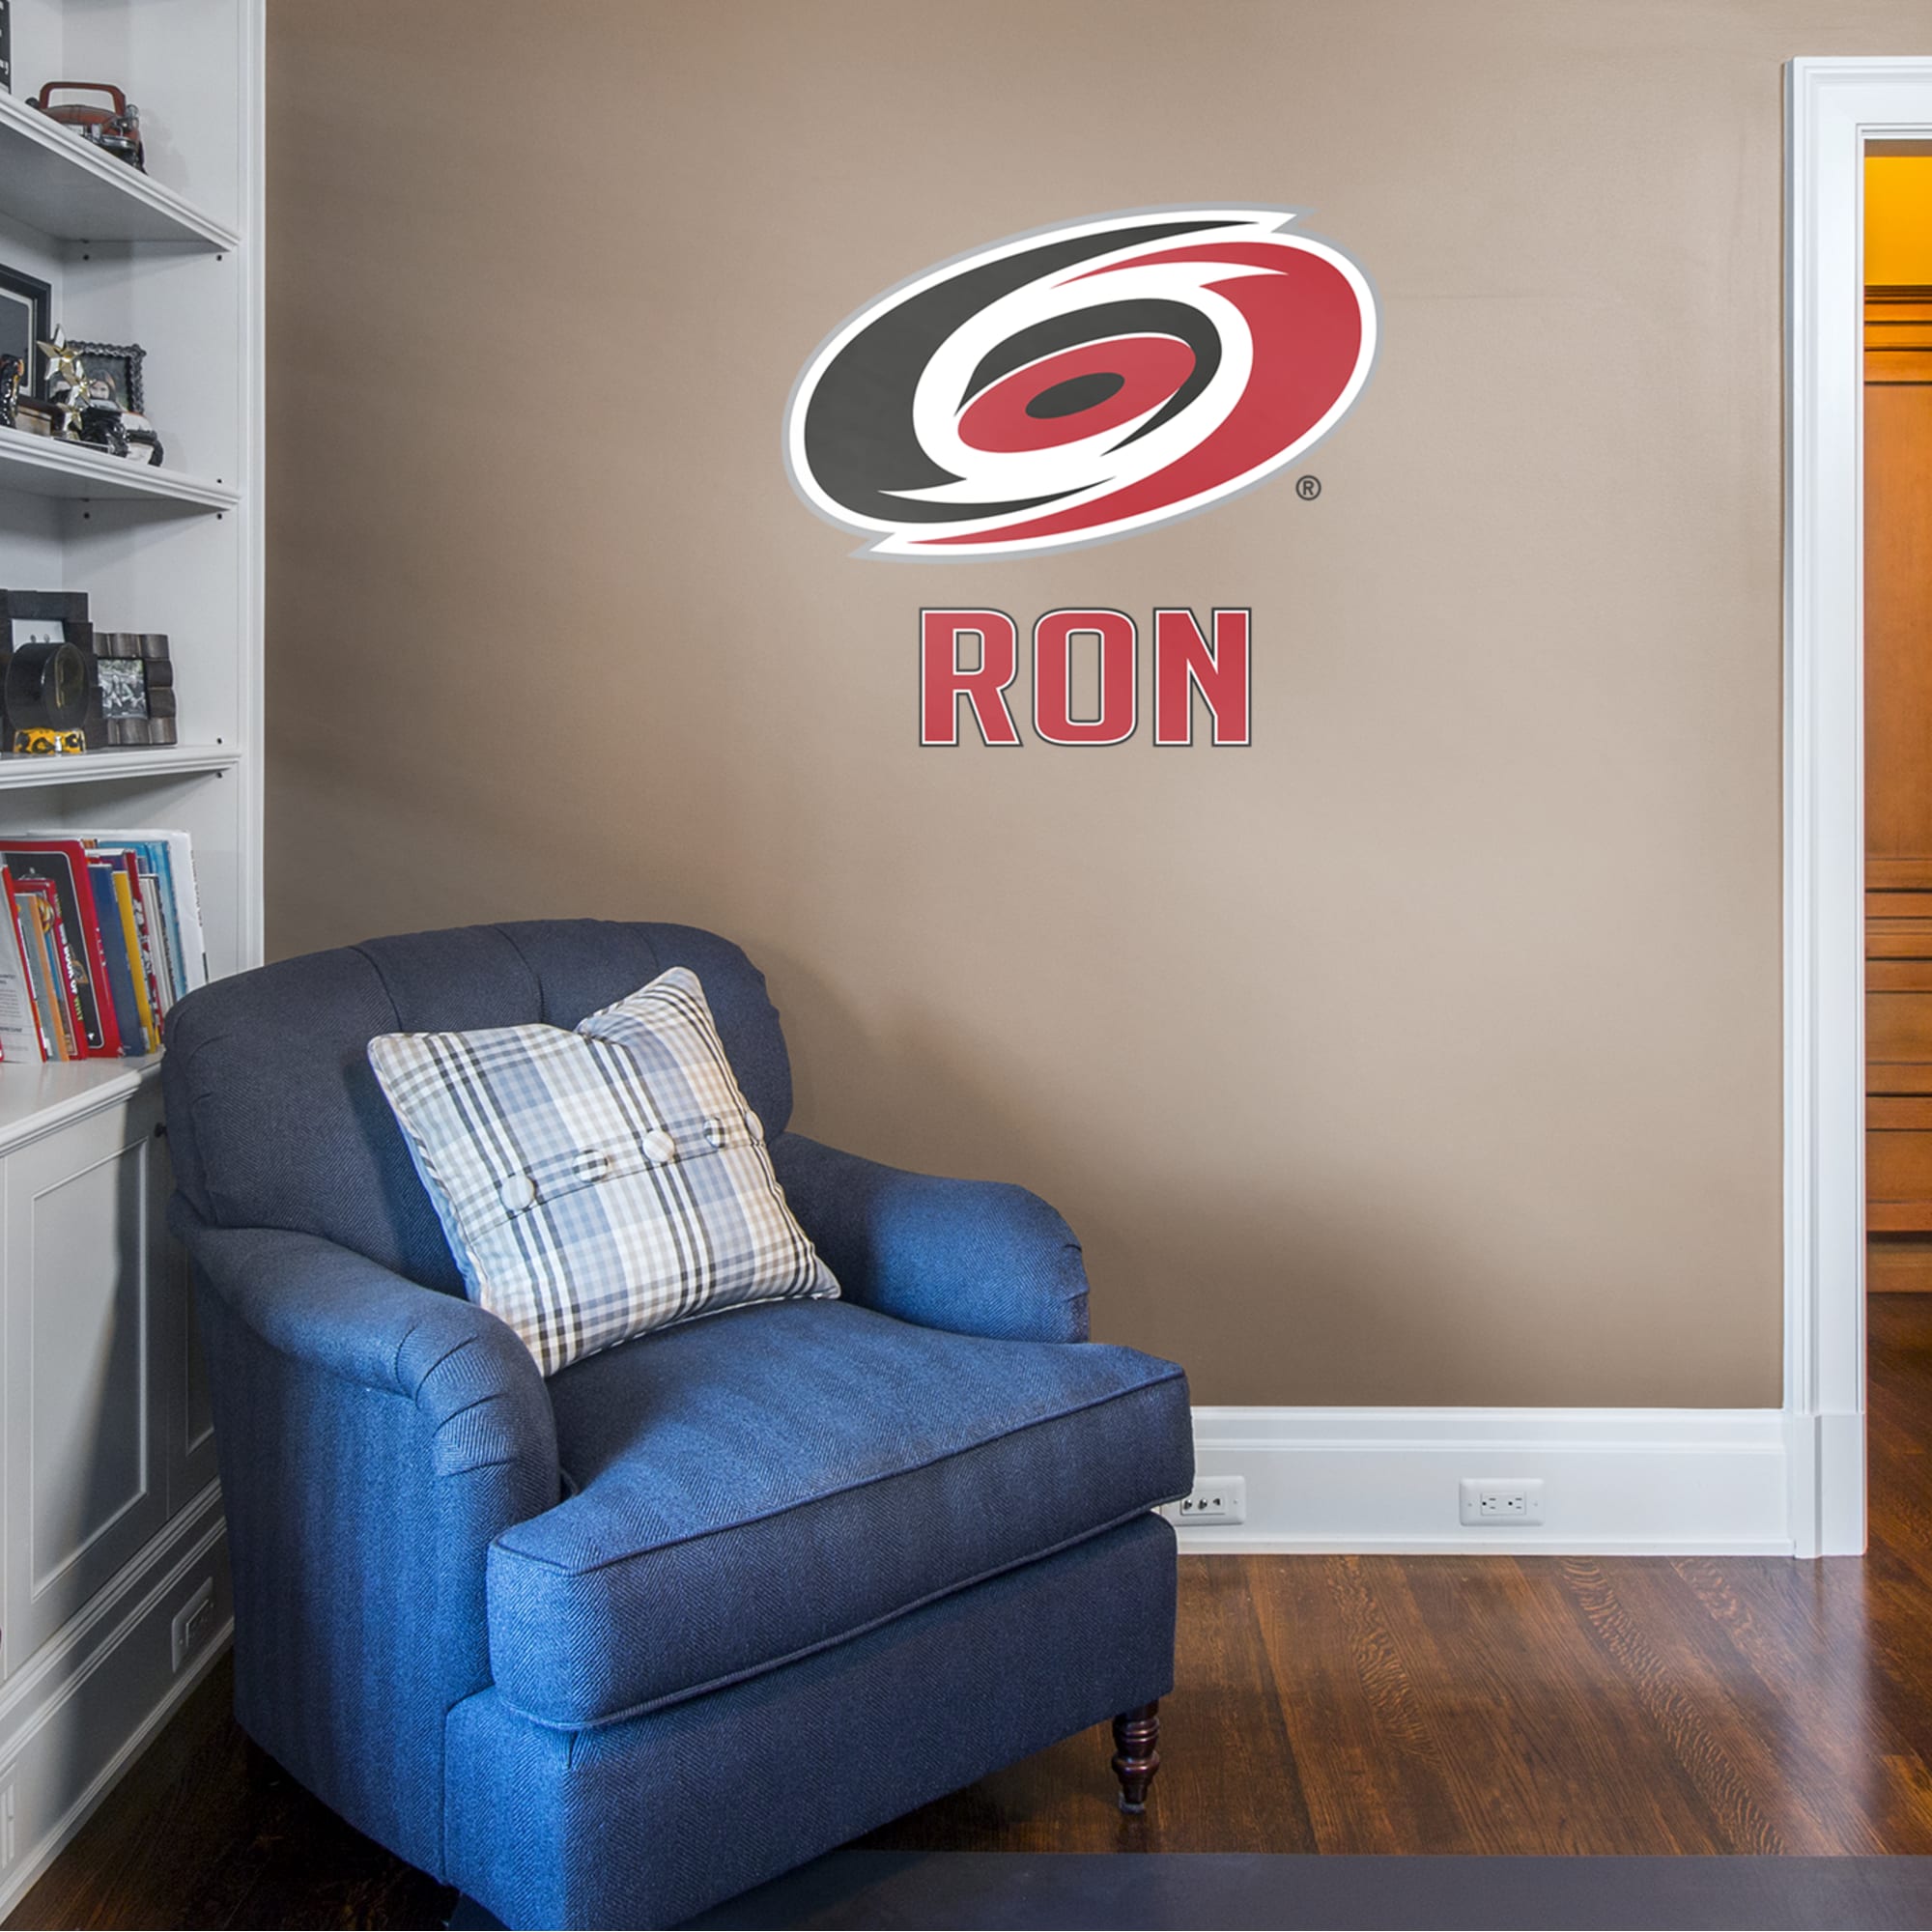 Carolina Hurricanes: Stacked Personalized Name - Officially Licensed NHL Transfer Decal in Red (39.5"W x 52"H) by Fathead | Viny